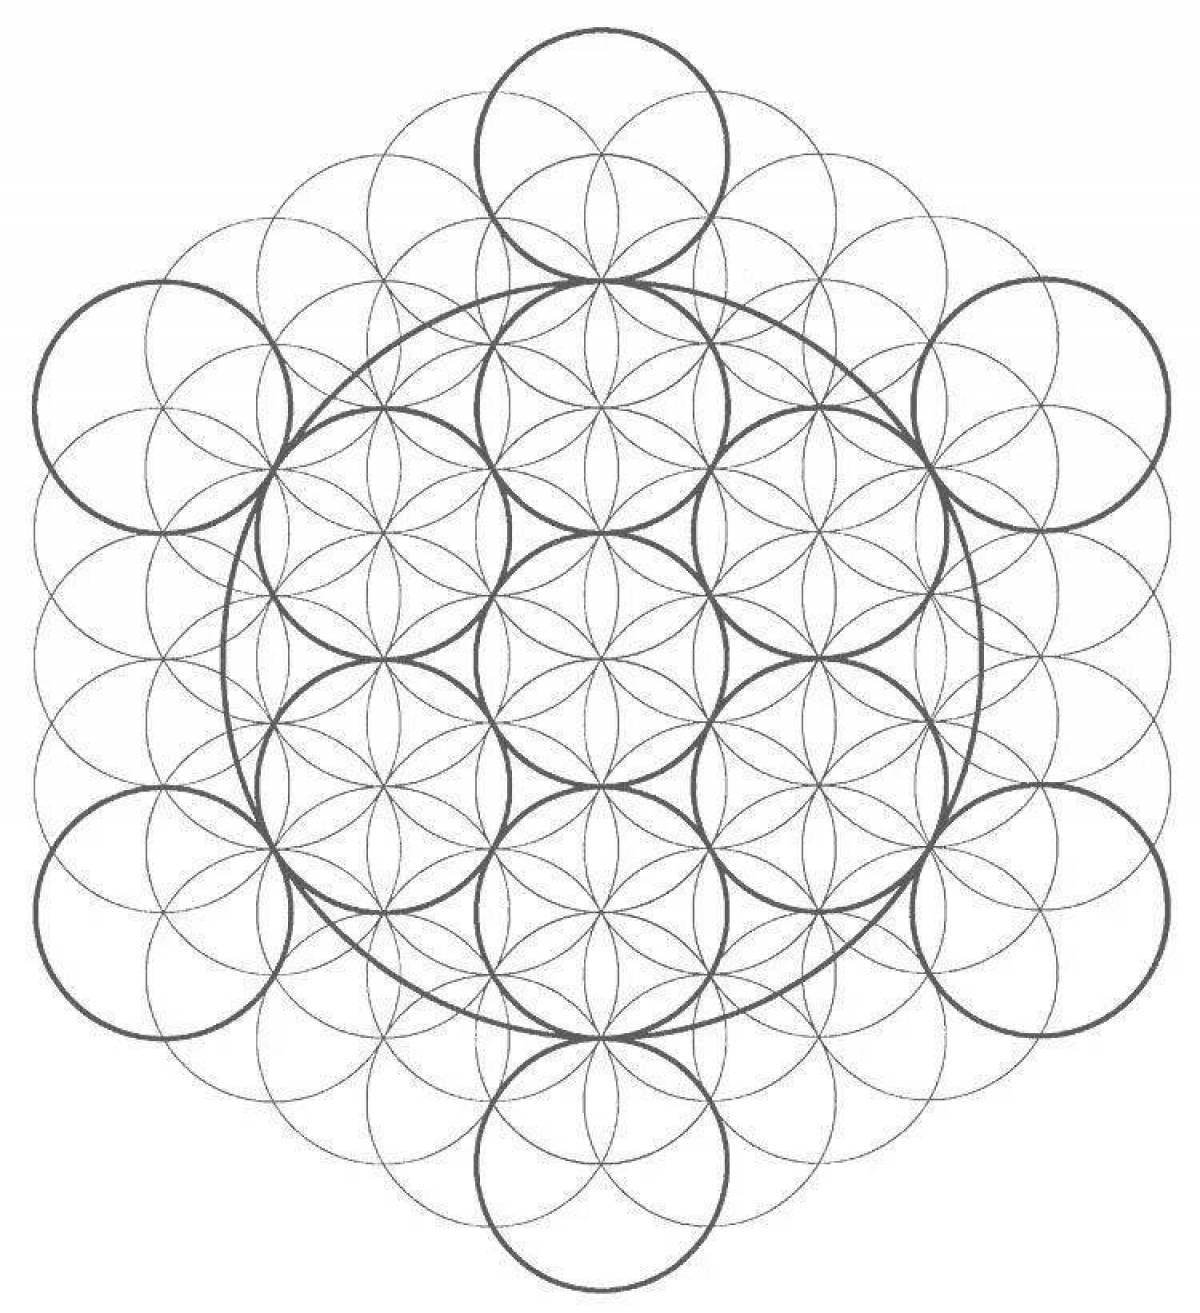 Great coloring flower of life